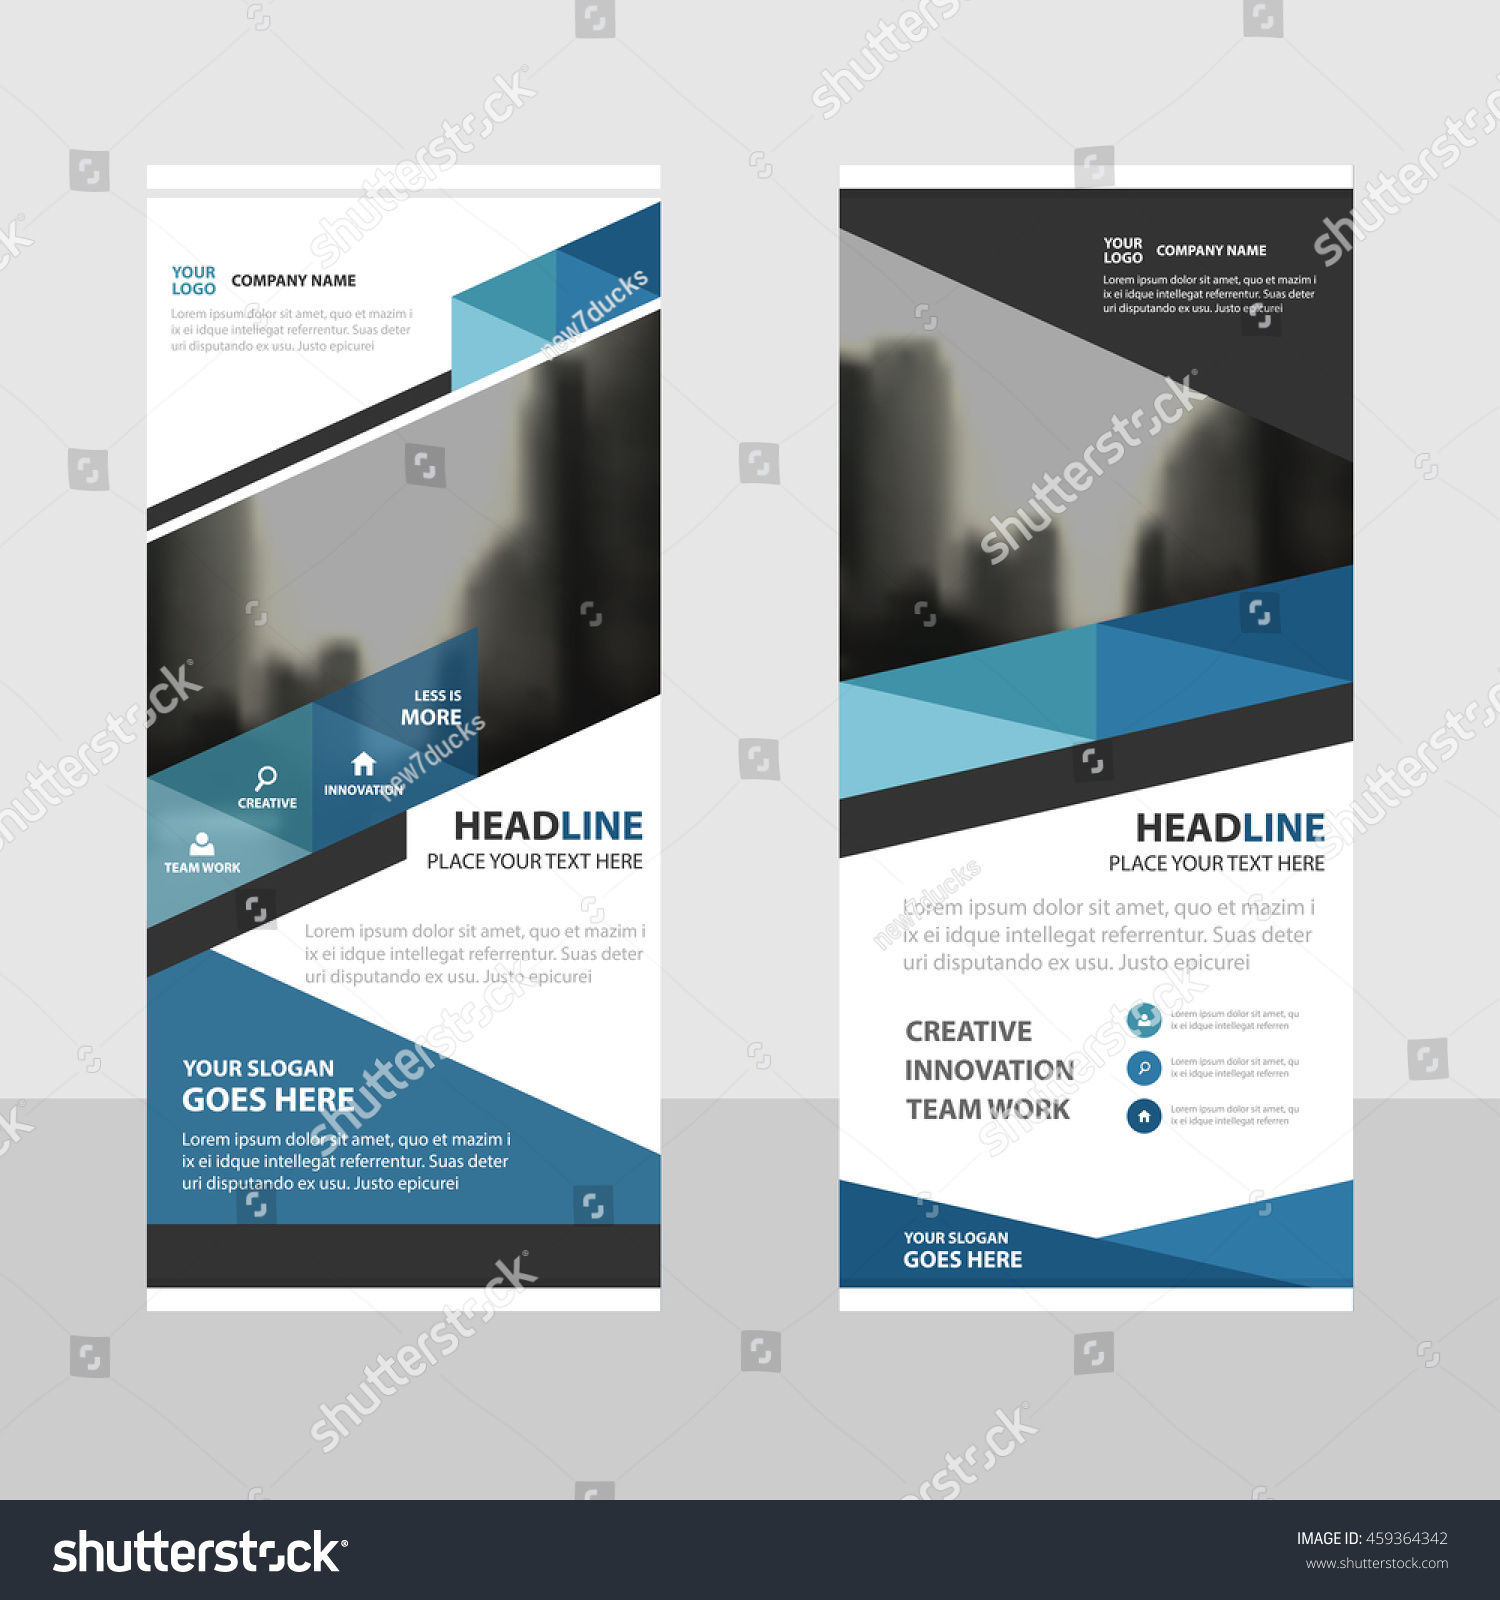 Blue triangle Business Roll Up Banner flat design template ,Abstract Geometric banner template Vector illustration set, #459364342